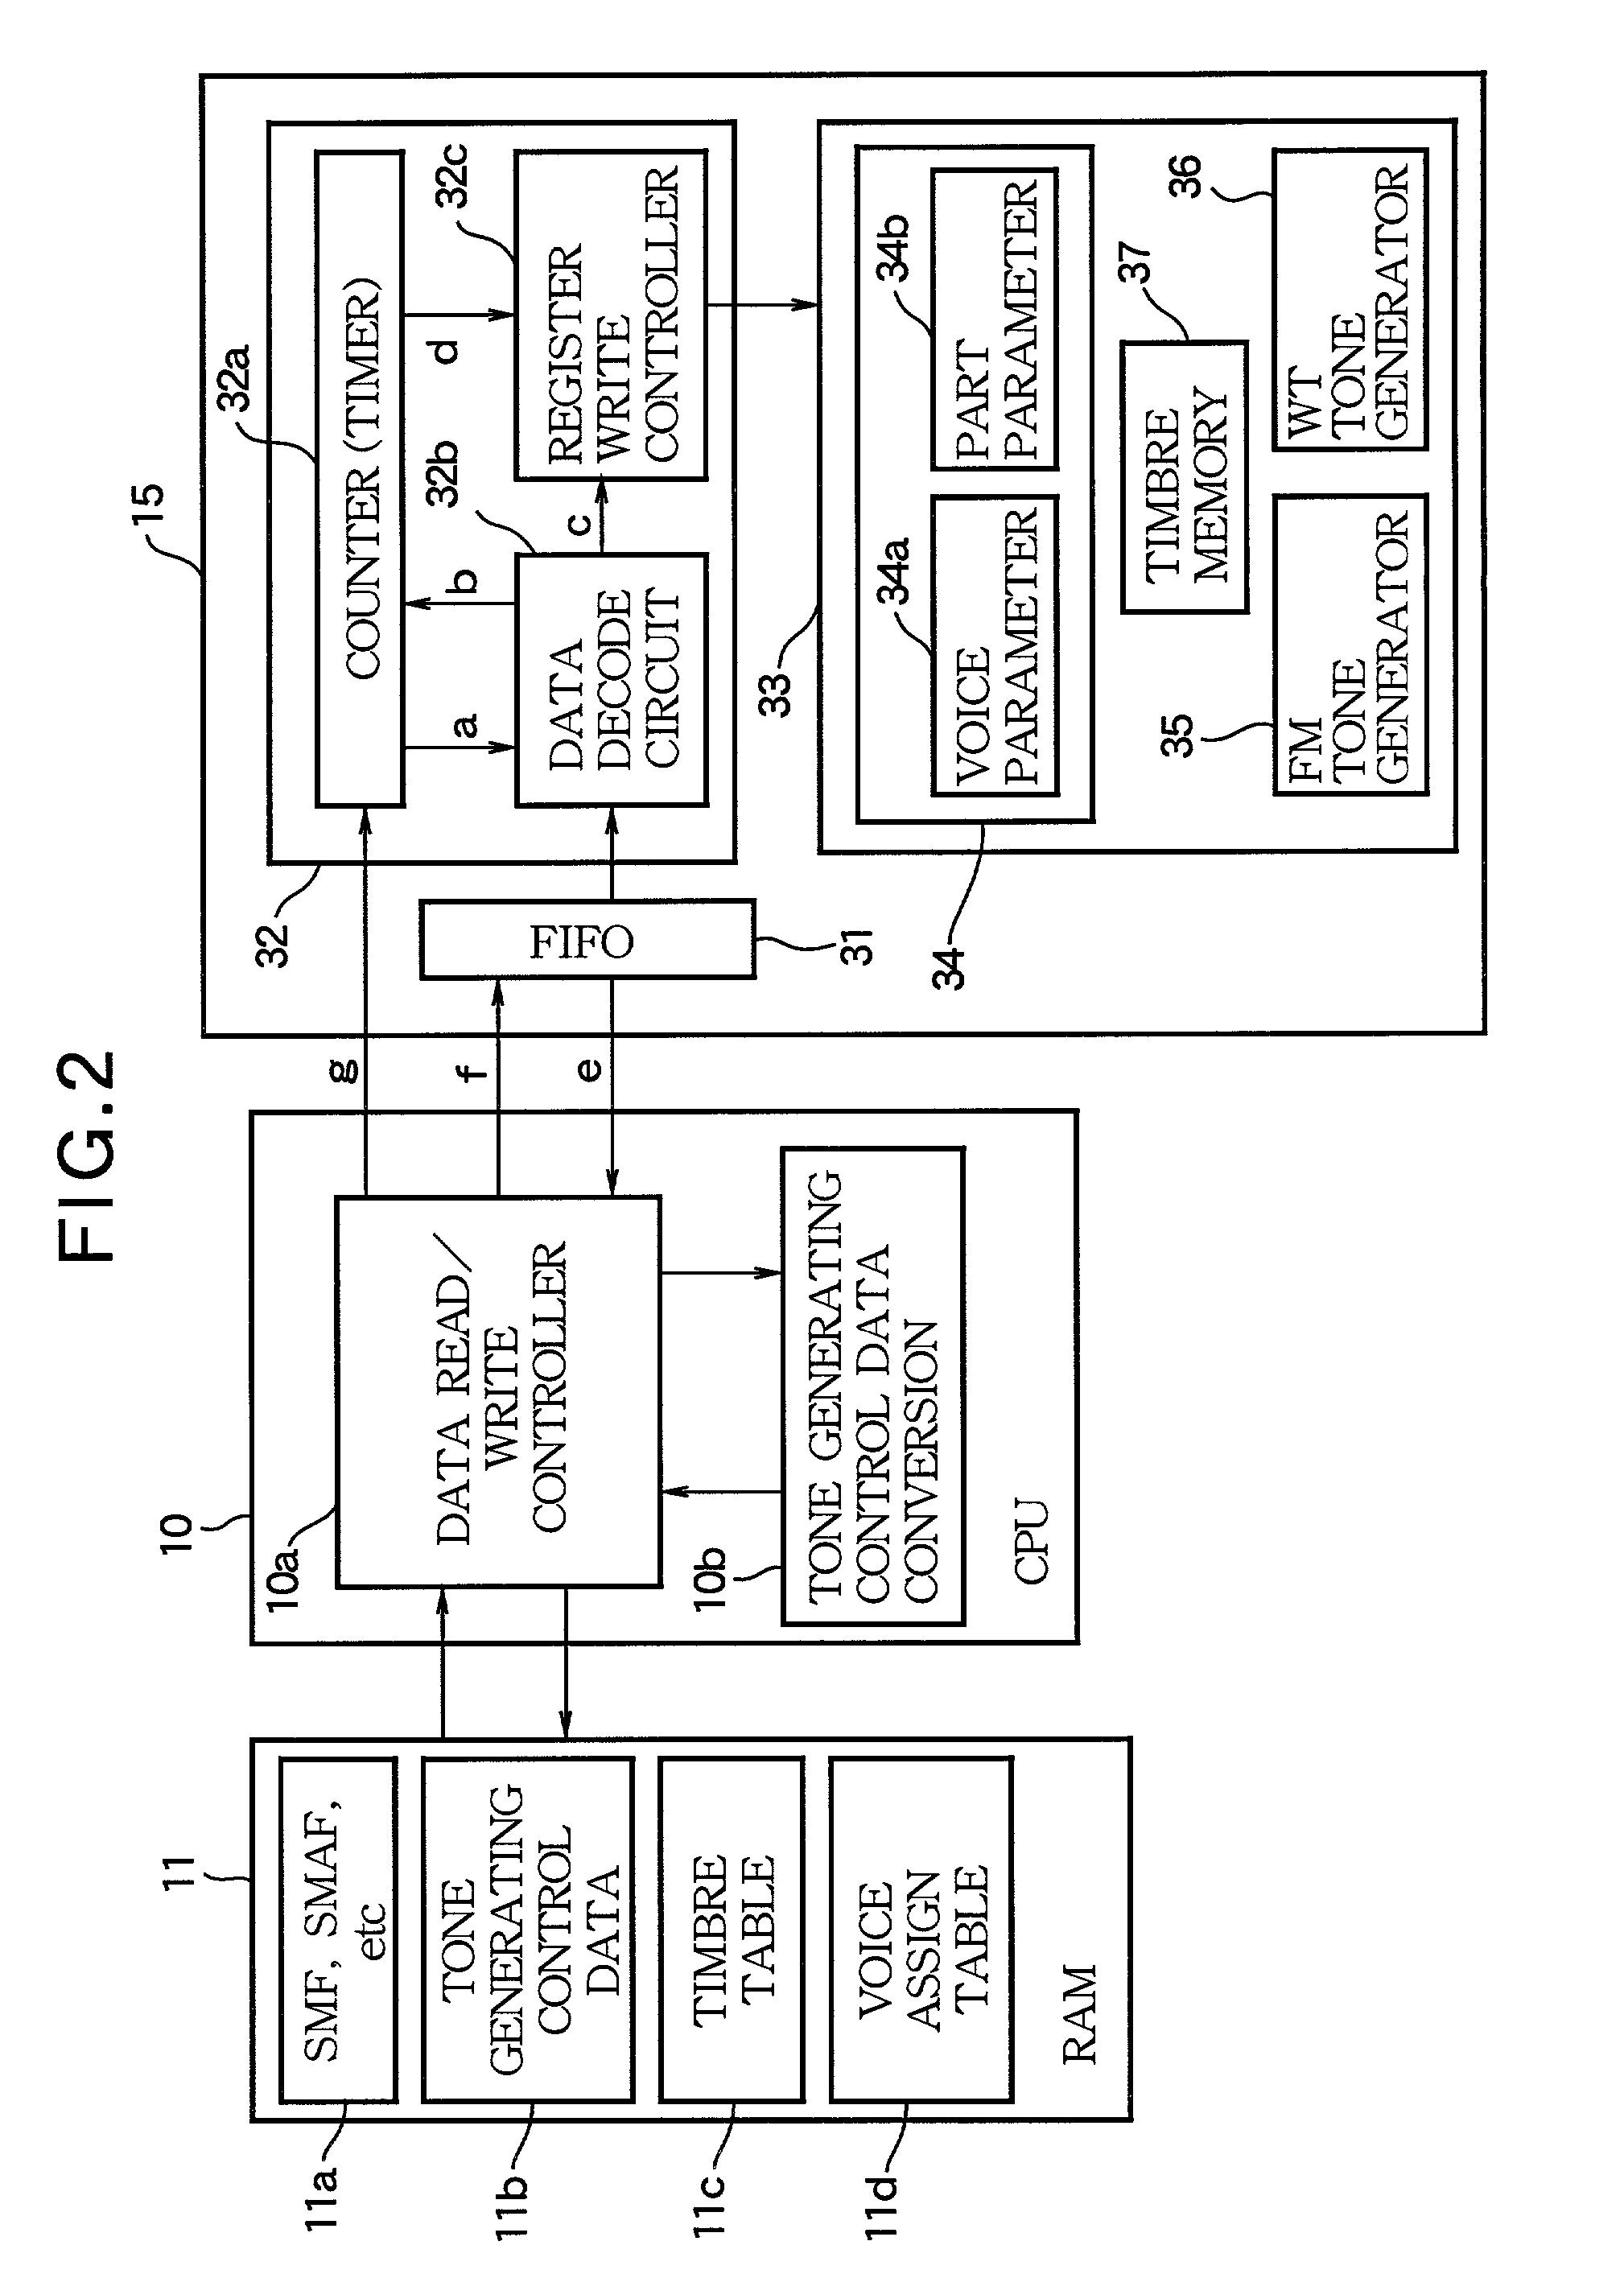 Tone generator apparatus sharing parameters among channels